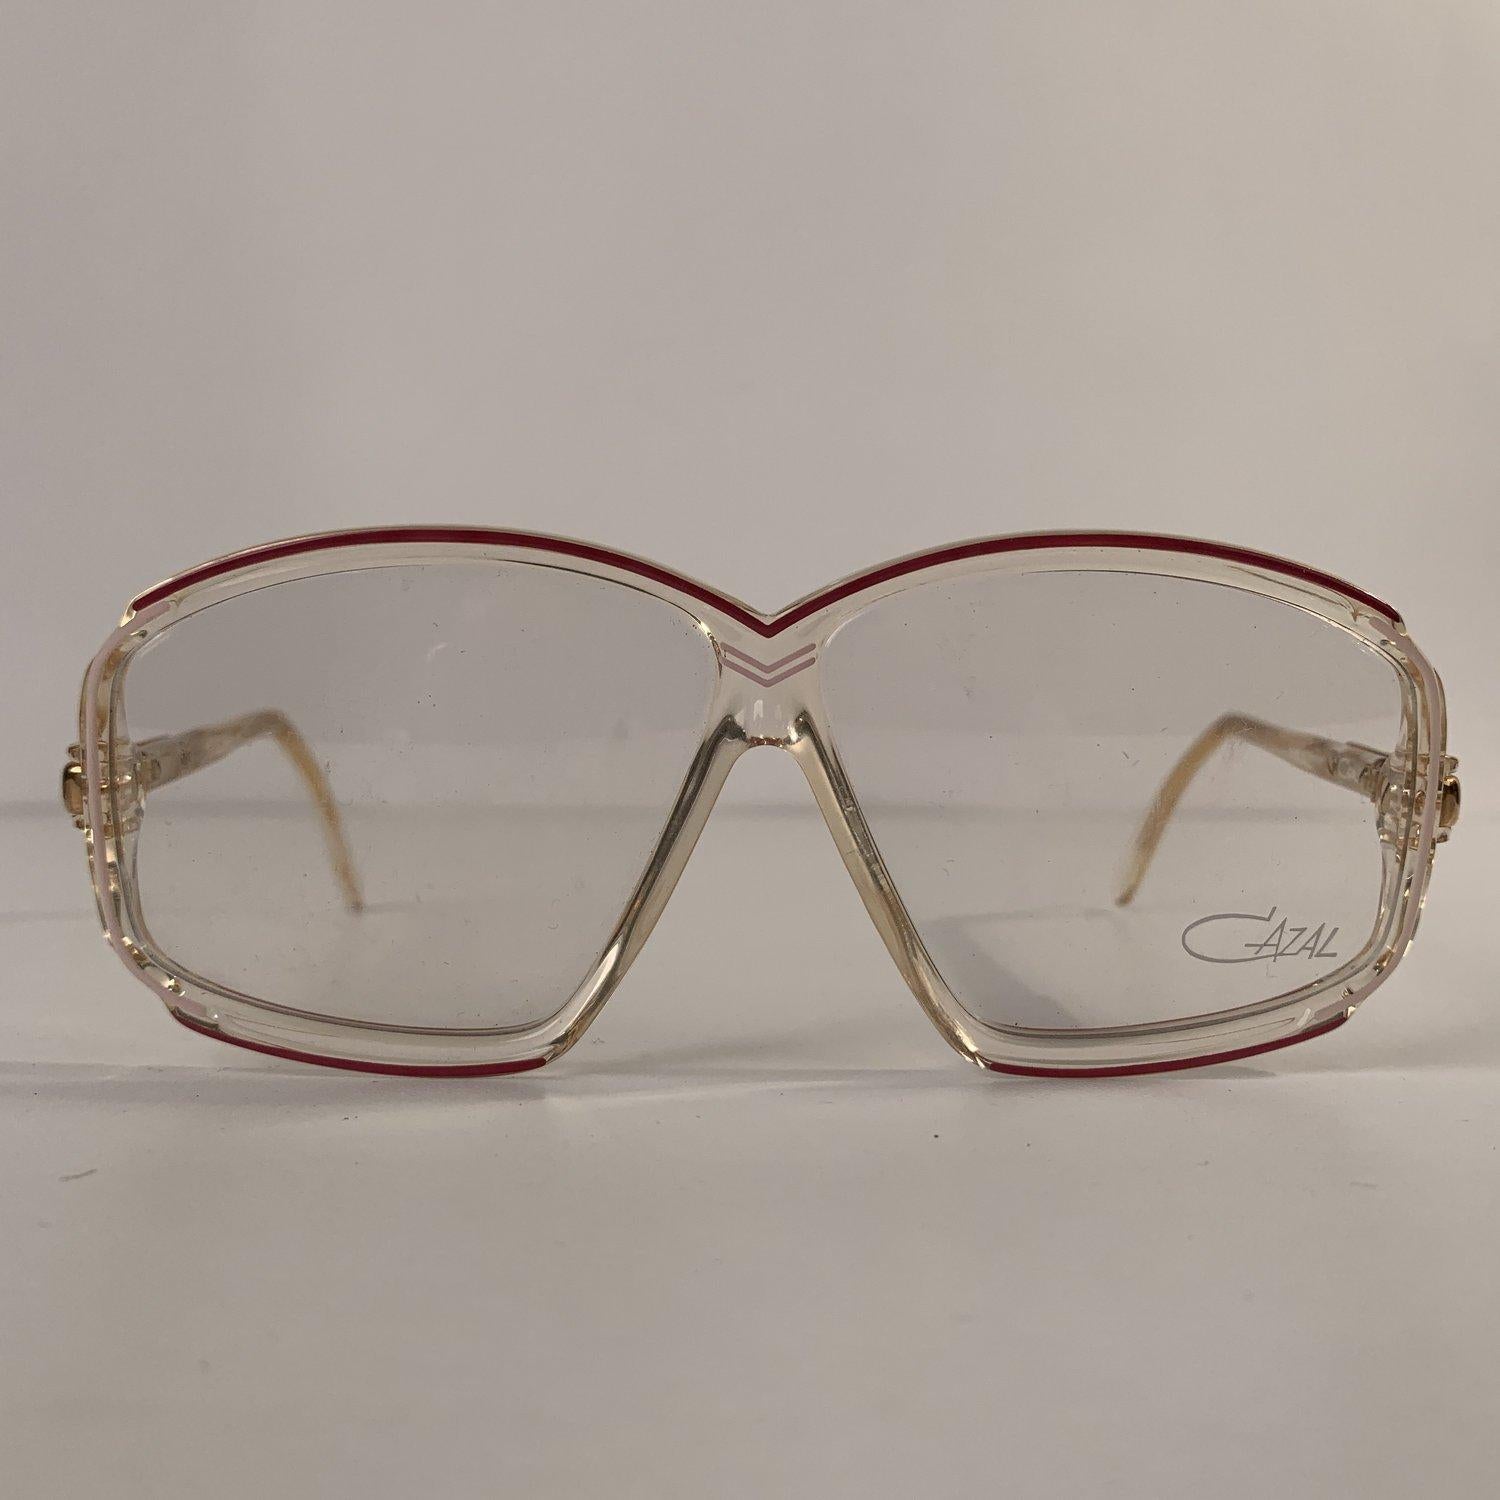 MATERIAL: Acetate COLOR: Clear MODEL: 153 GENDER: Adult Unisex SIZE: 59/8 Condition NOS (NEW OLD STOCK) - Never Worn or Used - They will come with a GENERIC Case Measurements TEMPLE MAX. LENGTH: 130 mm EYE / LENS MAX. WIDTH: 59 mm EYE / LENS MAX.